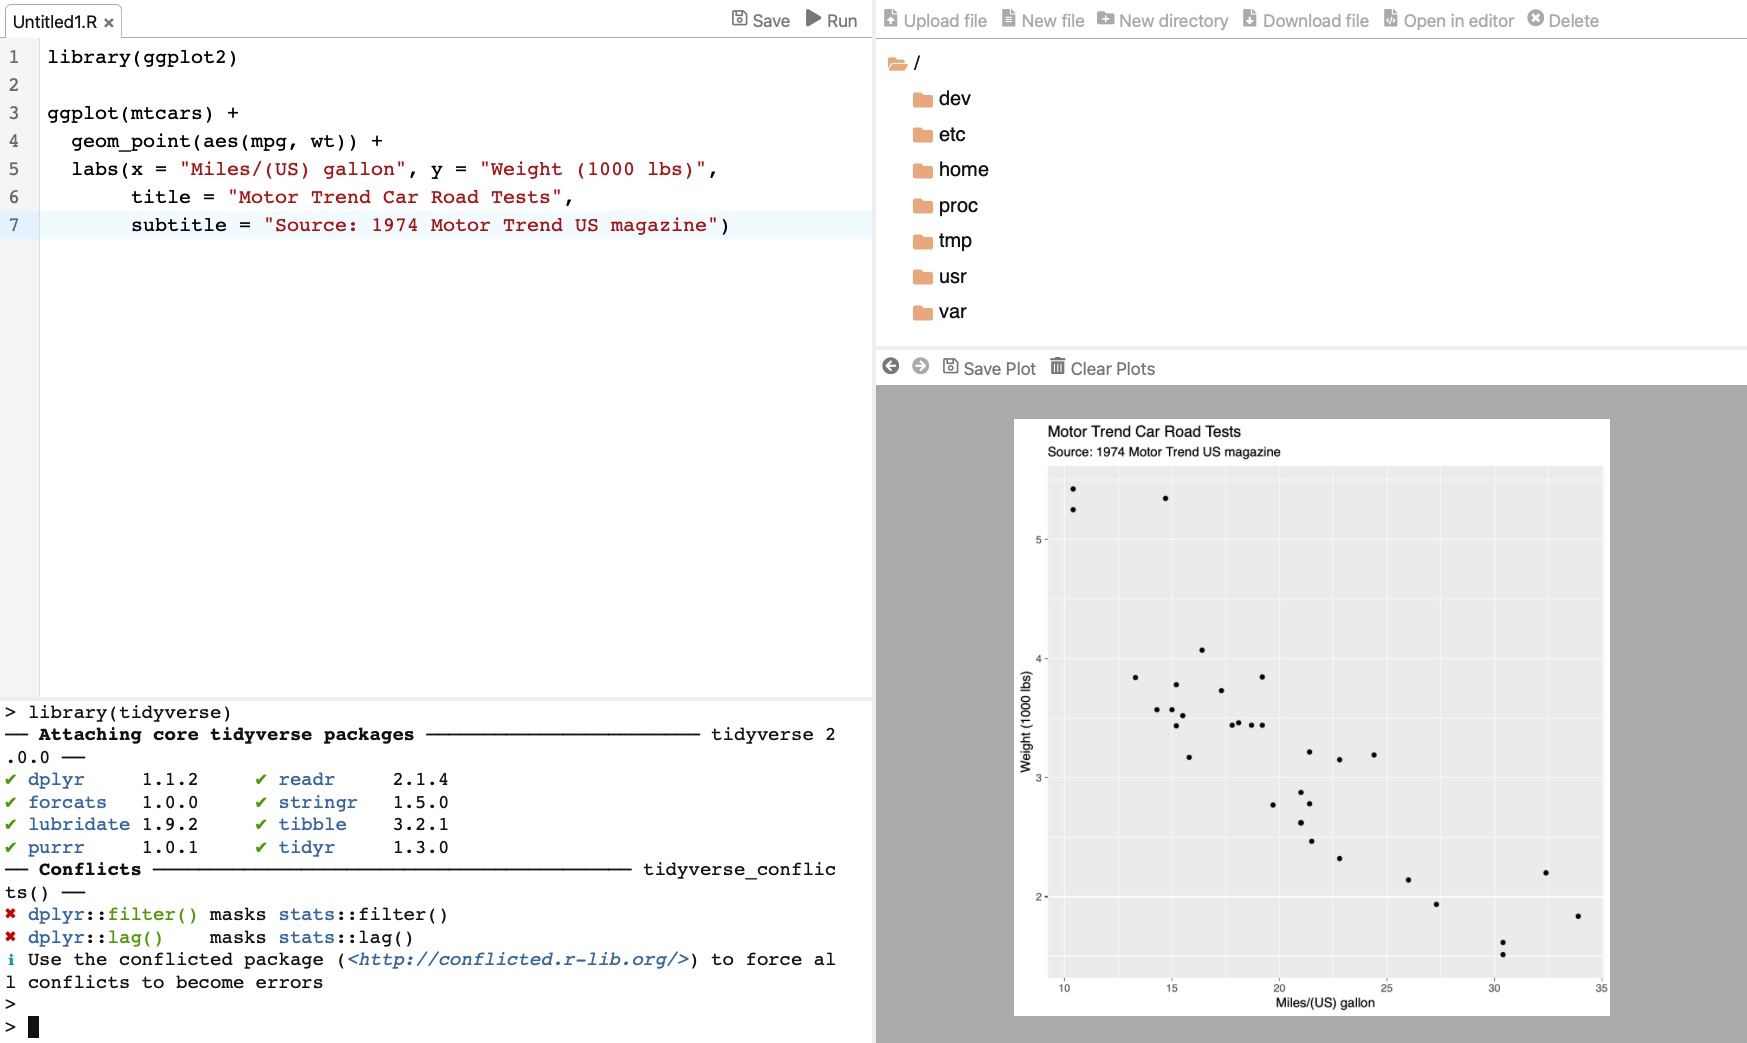 A screenshot the webR REPL app. The code to generate a ggplot, along with its output, is shown in the app.